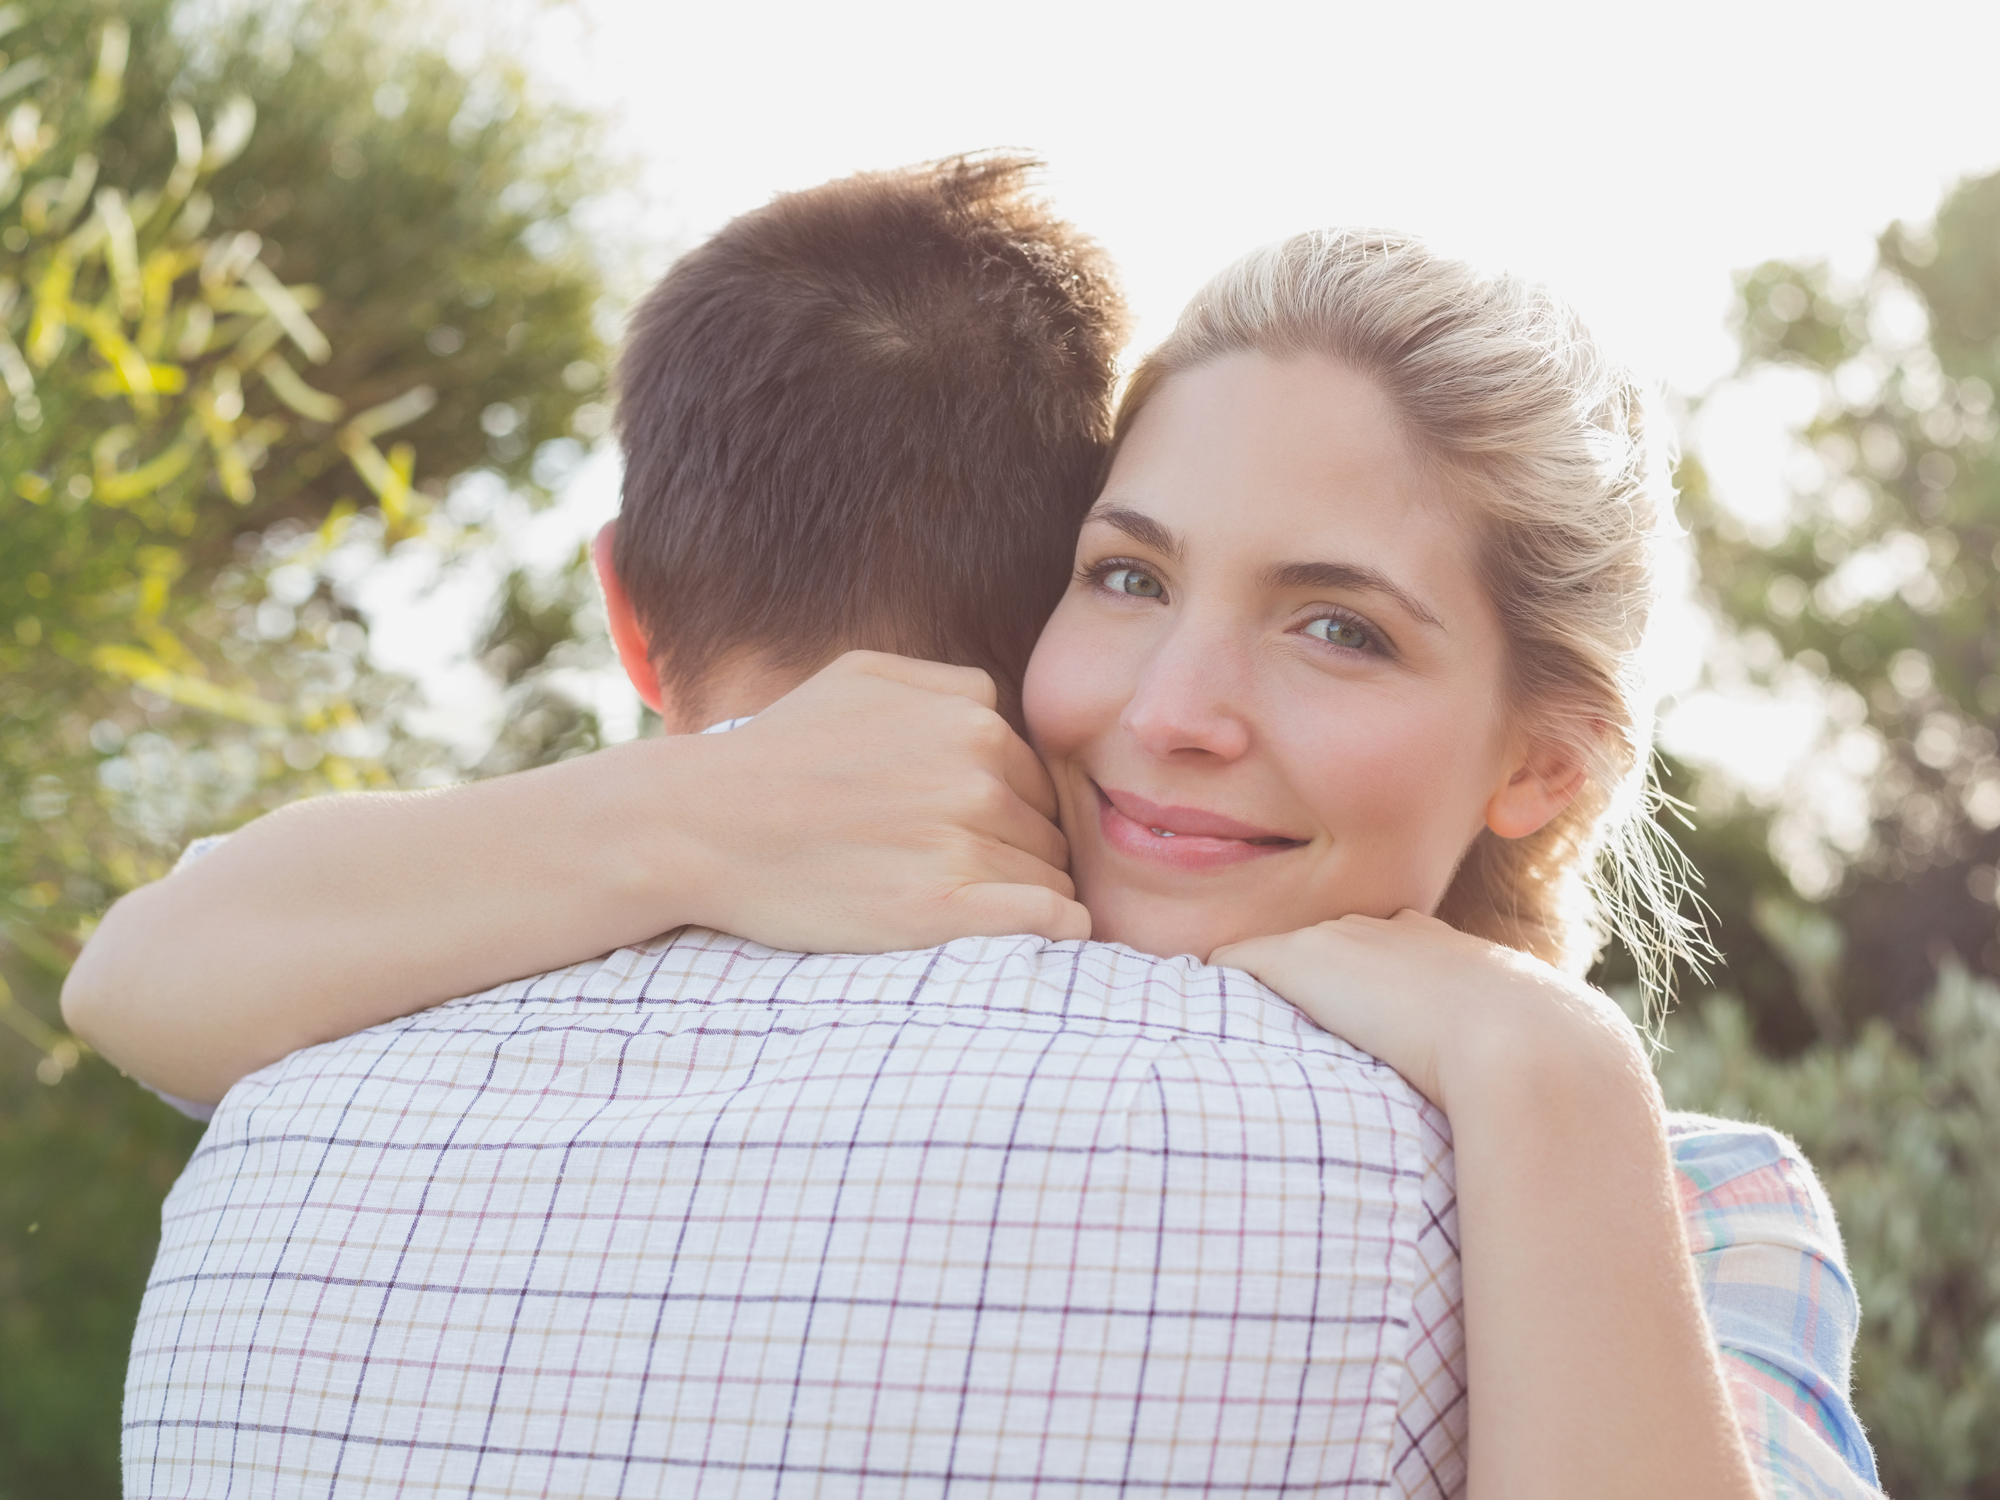 Do you need to boost your ‘love’ hormone?